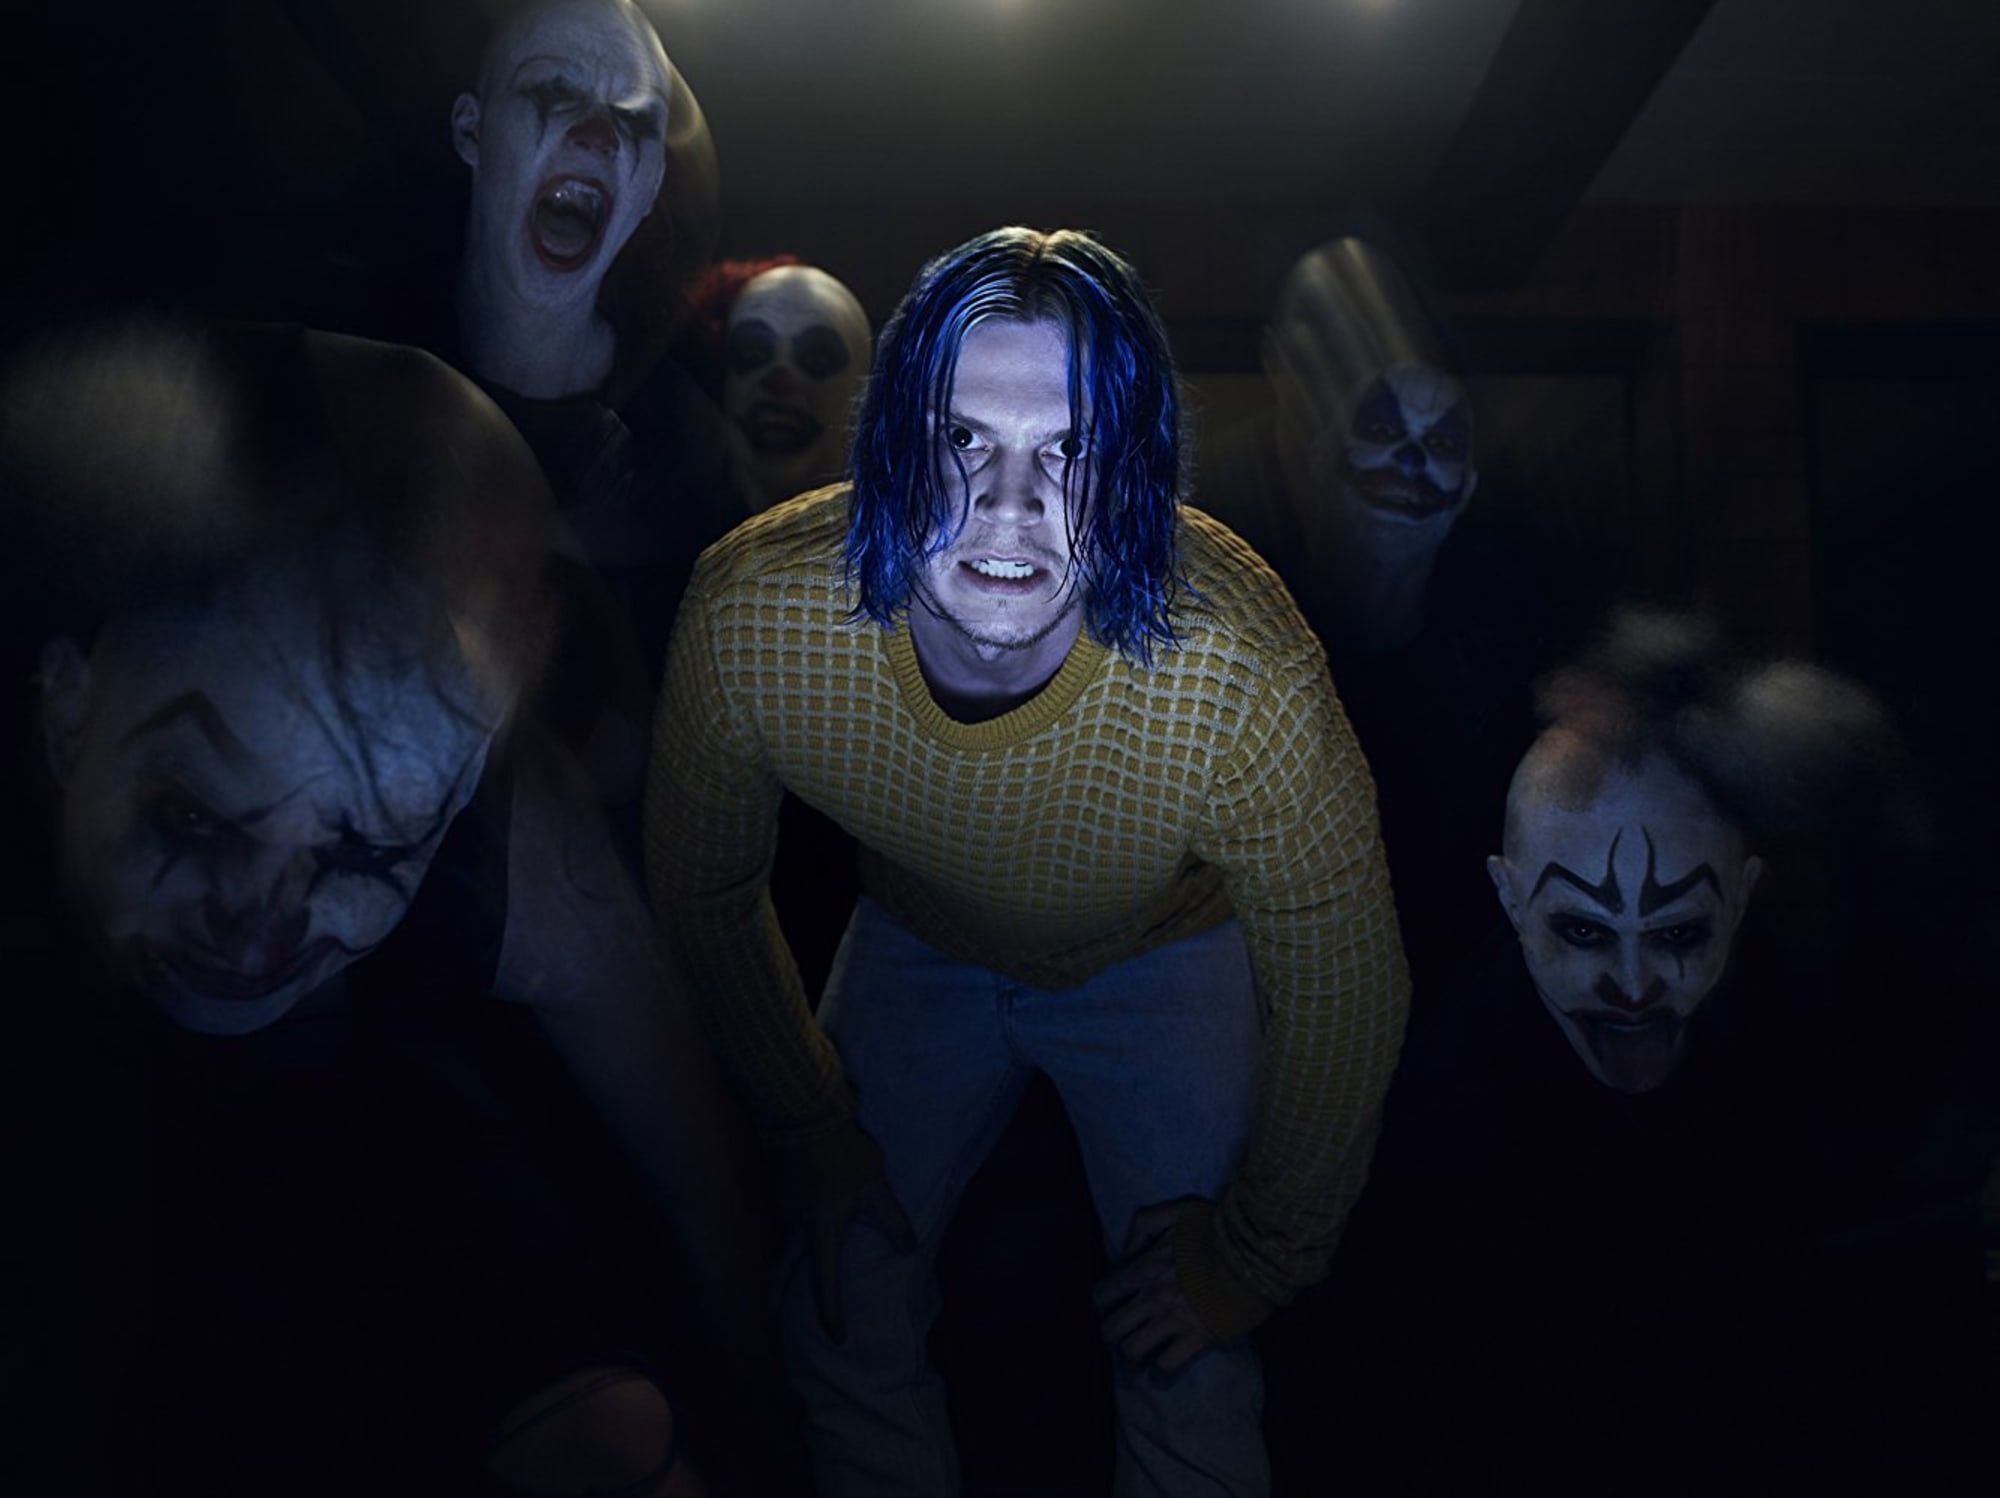 American Horror Story Cult Episode 9 Recap And Review Drink The Kool Aid